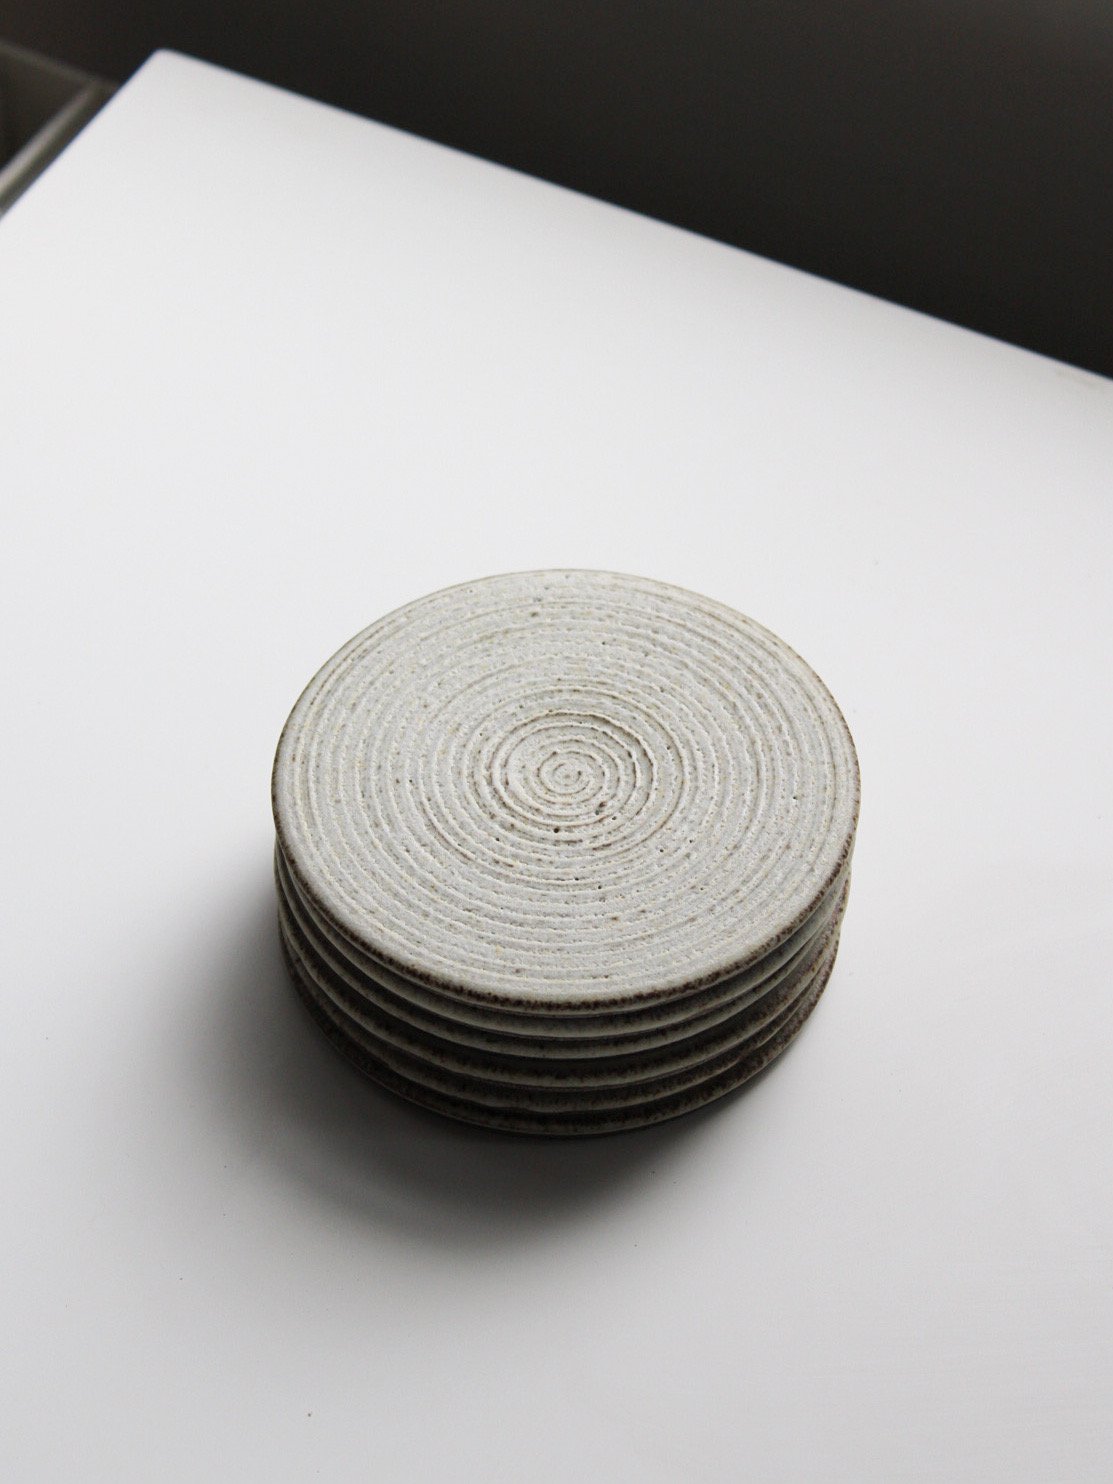 Image of coaster in ivory